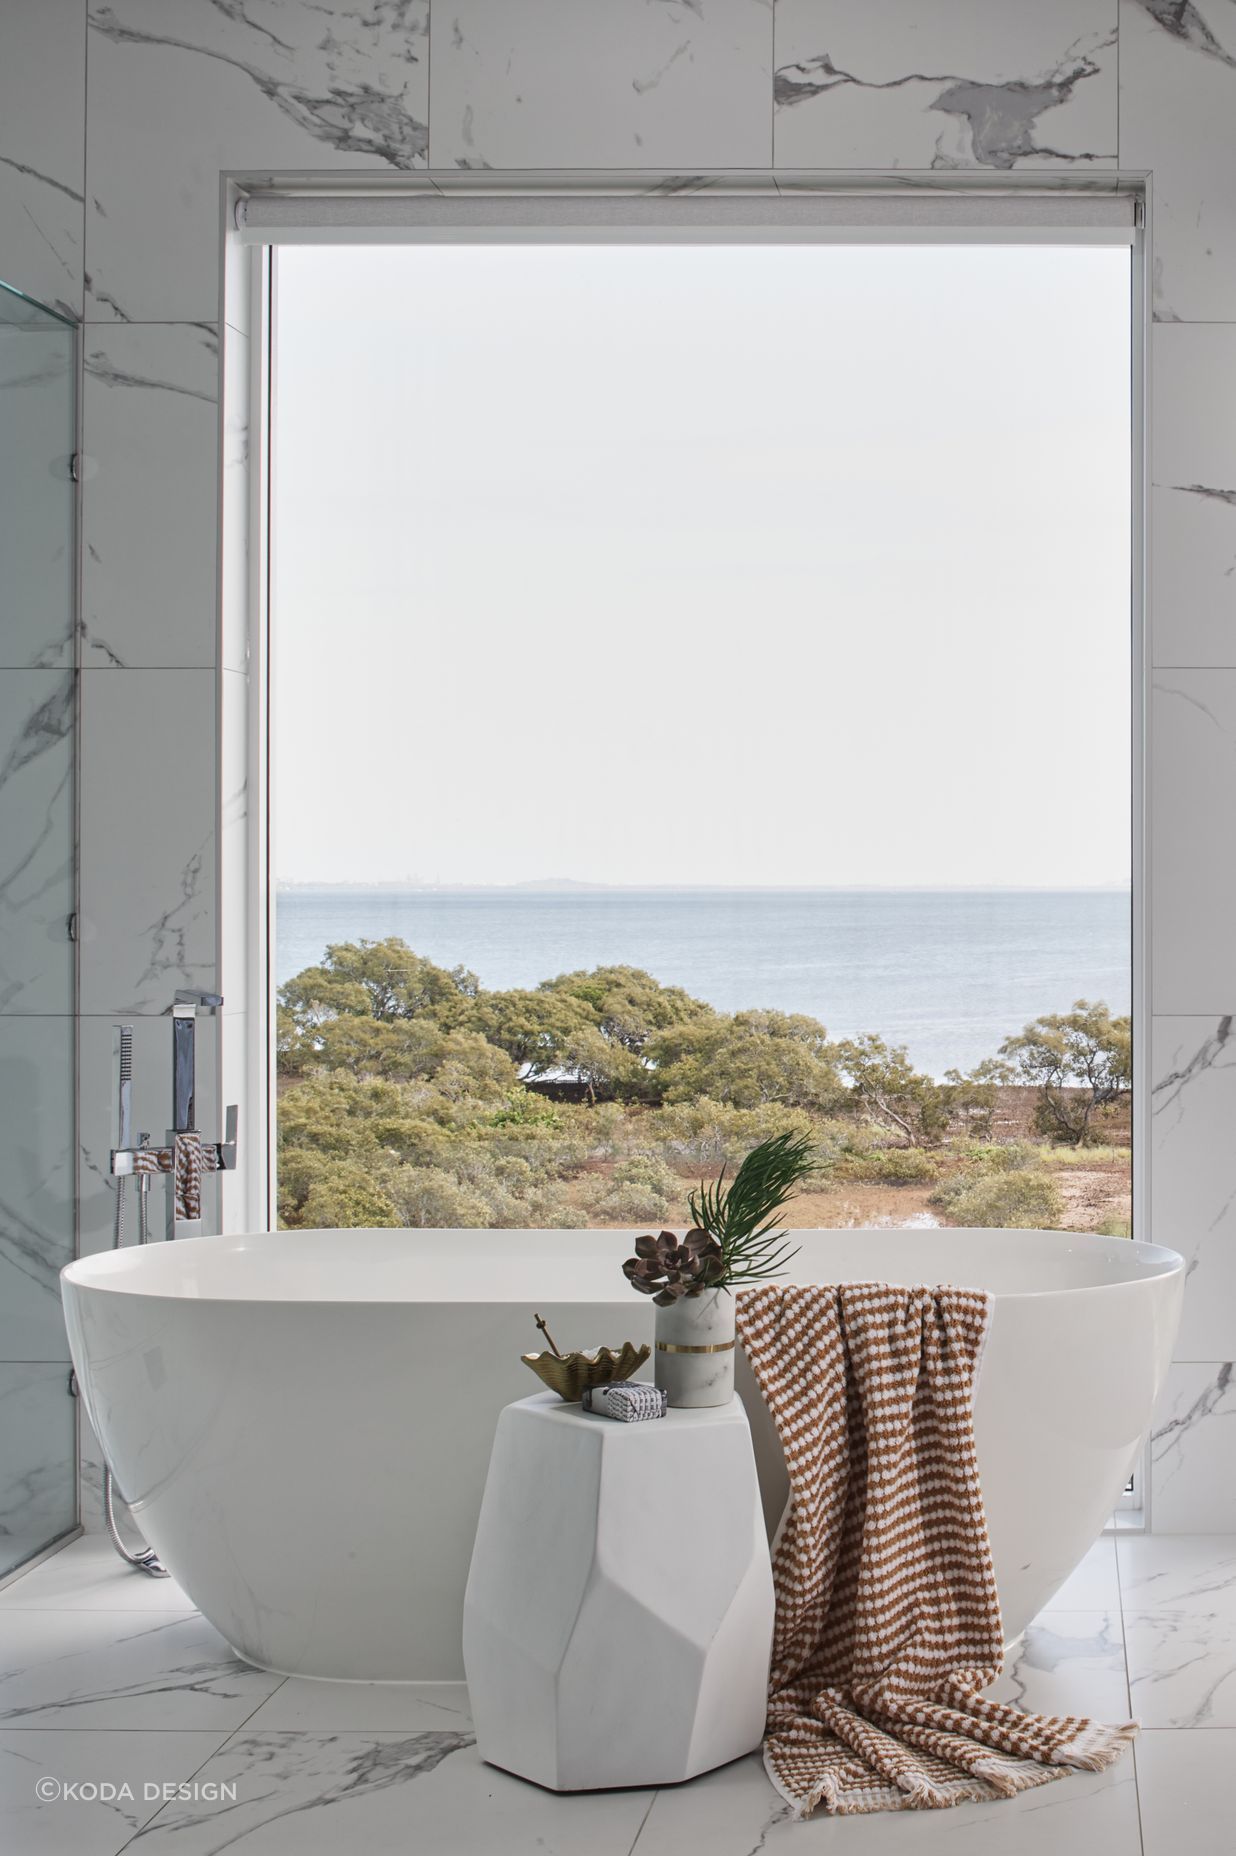 The perfect view for a coastal style bathroom.